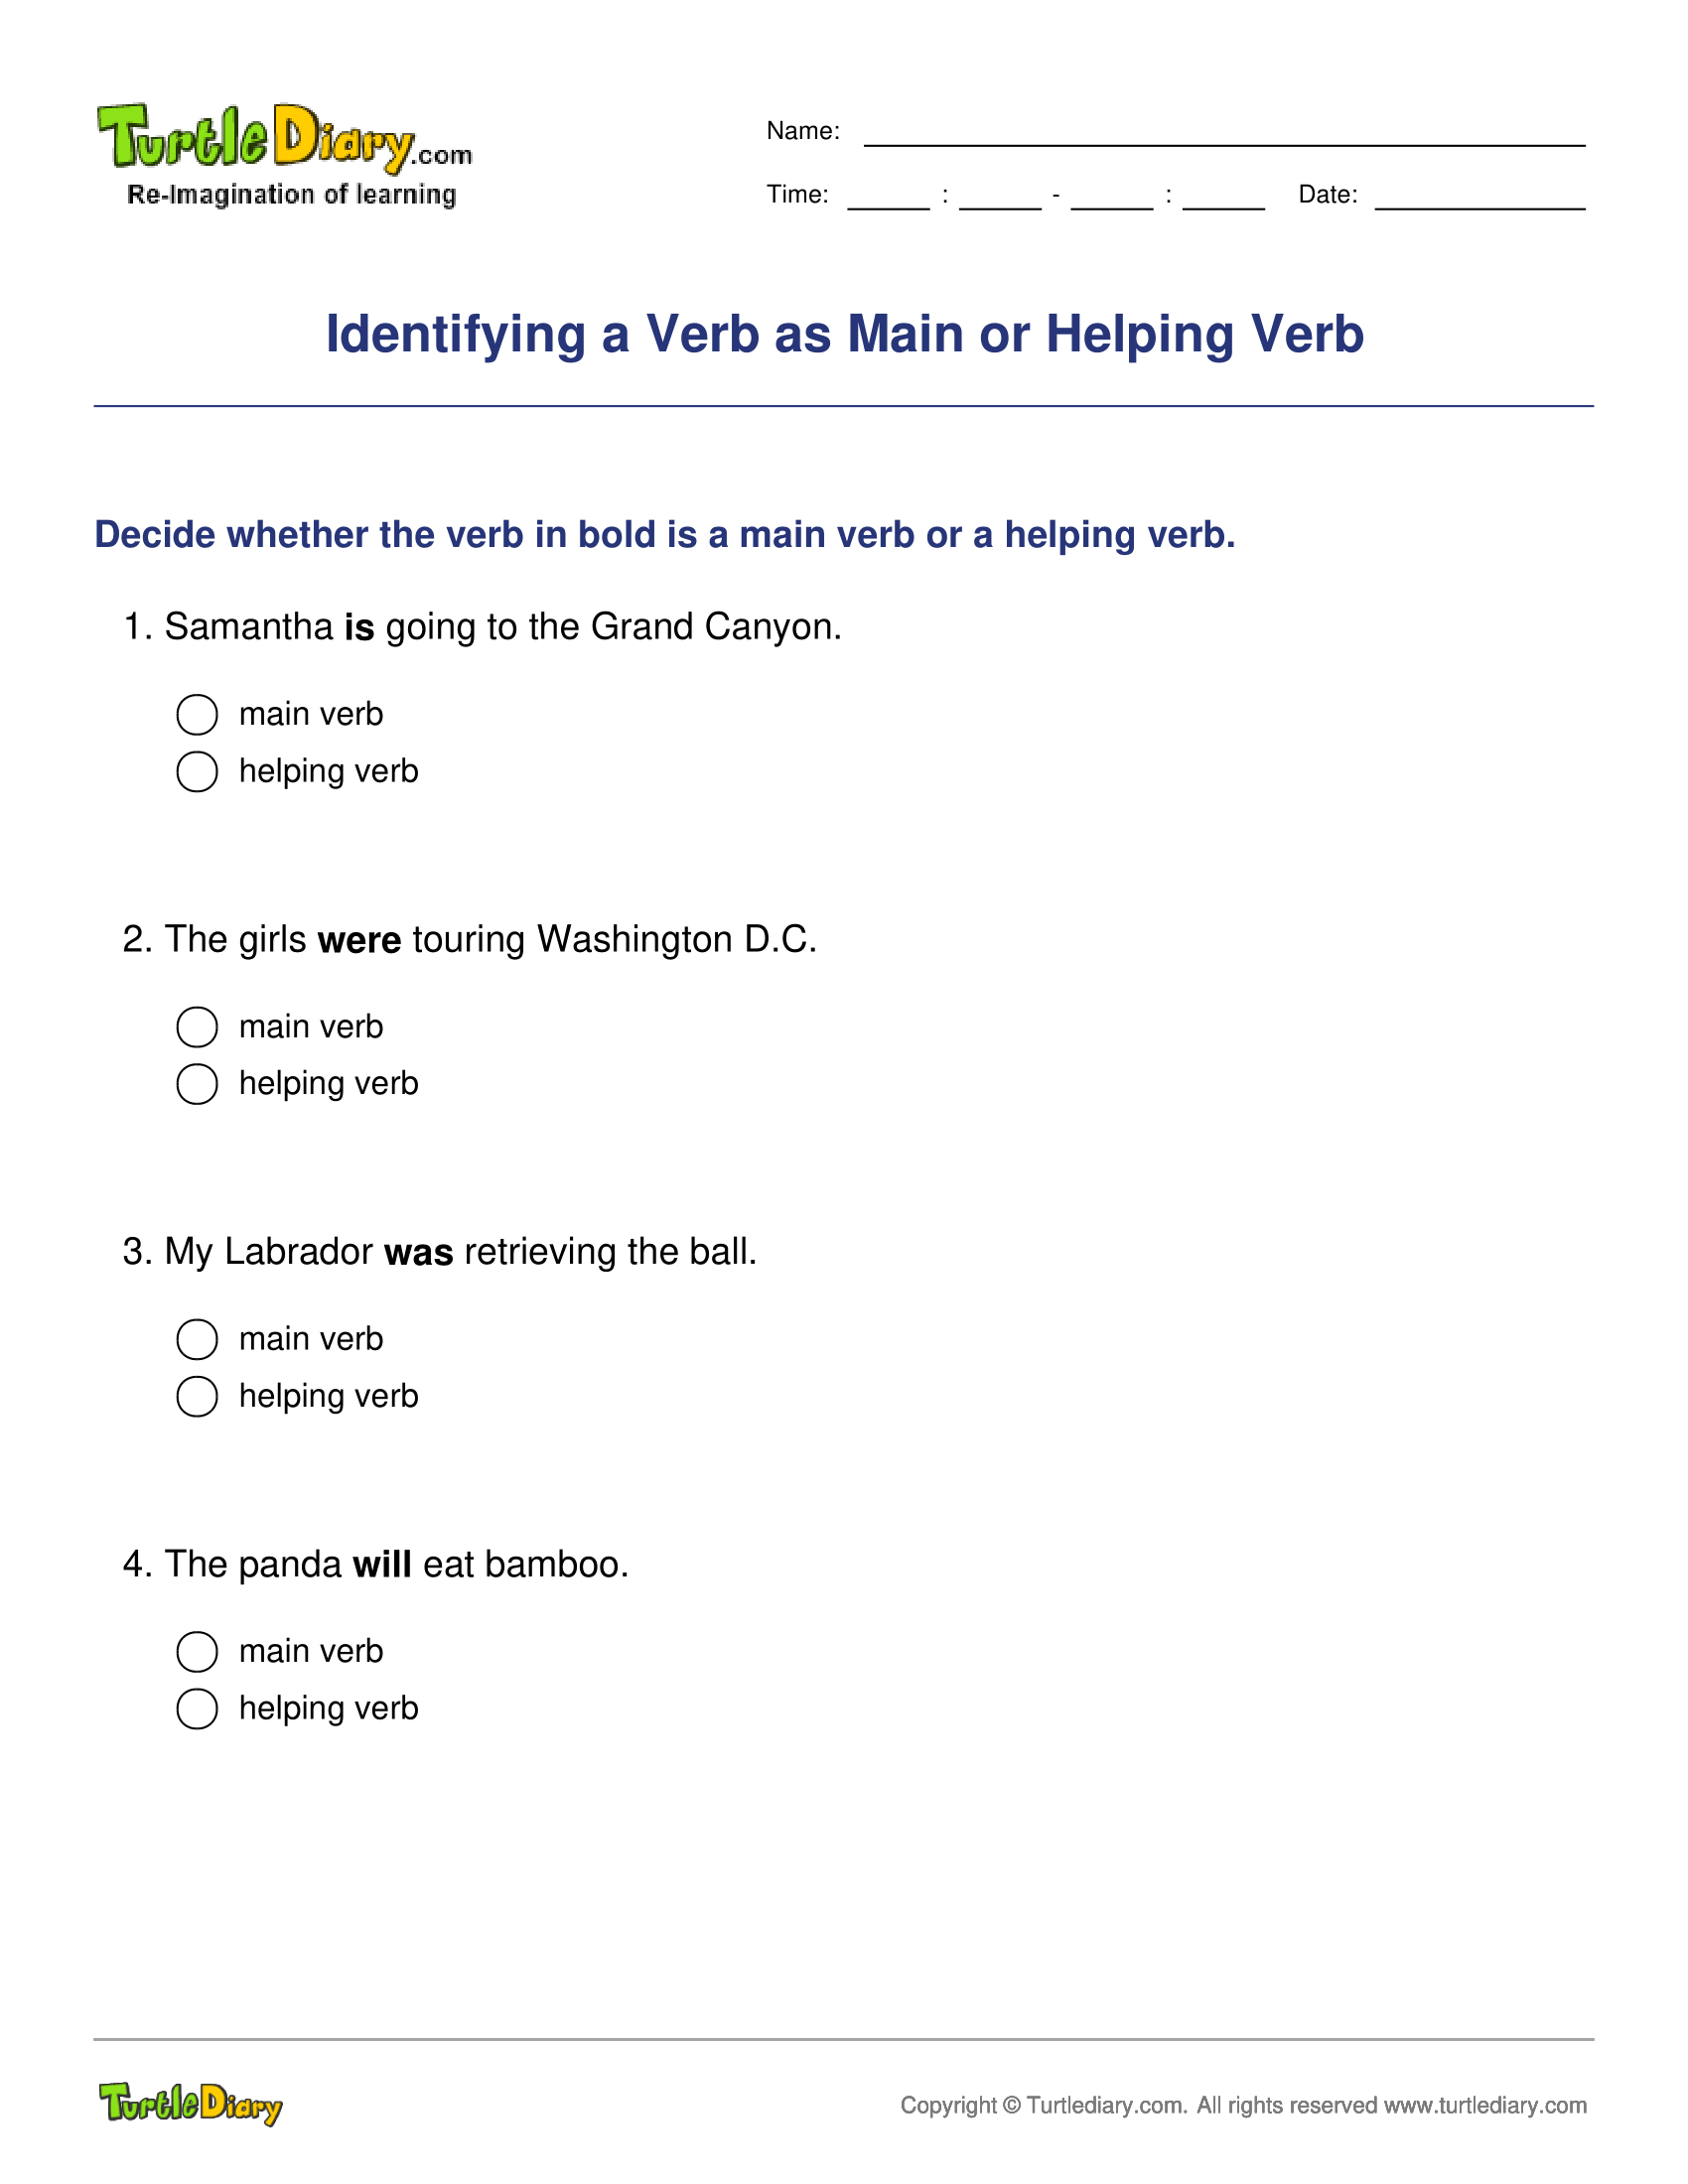 Identifying a Verb as Main or Helping Verb